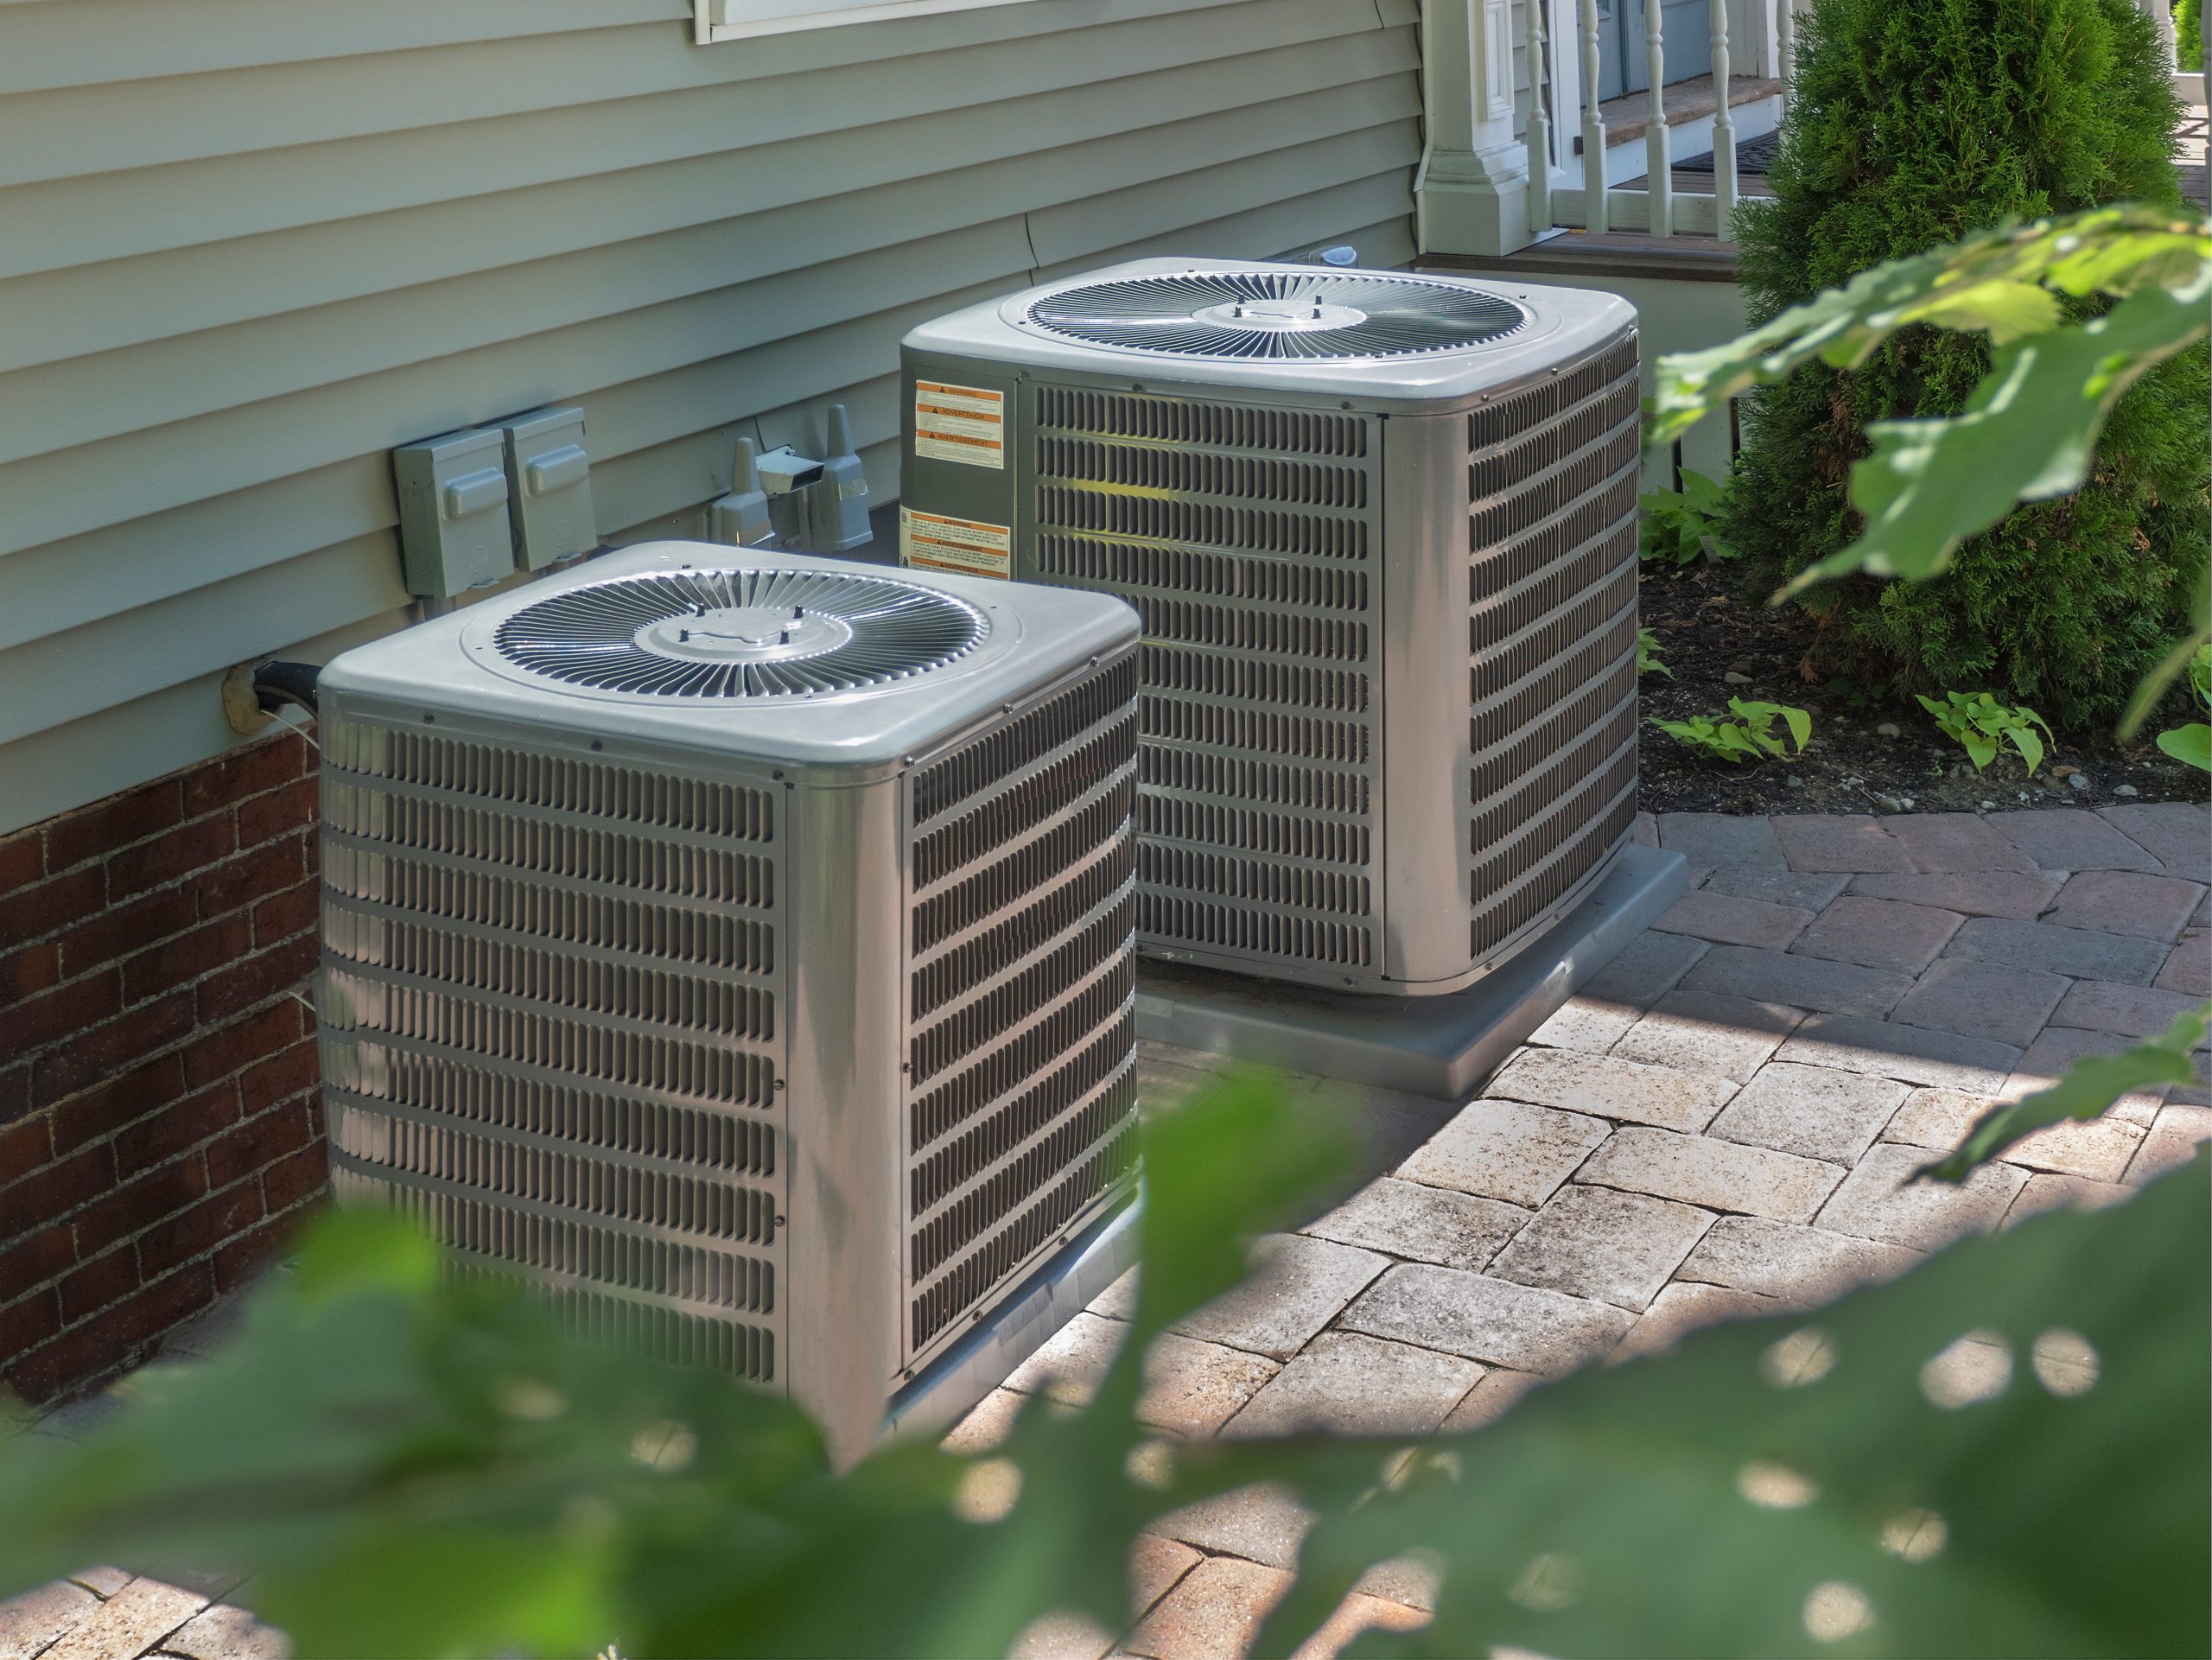 HVAC Heating And Air Conditioning Residential Units Or Heat Pump